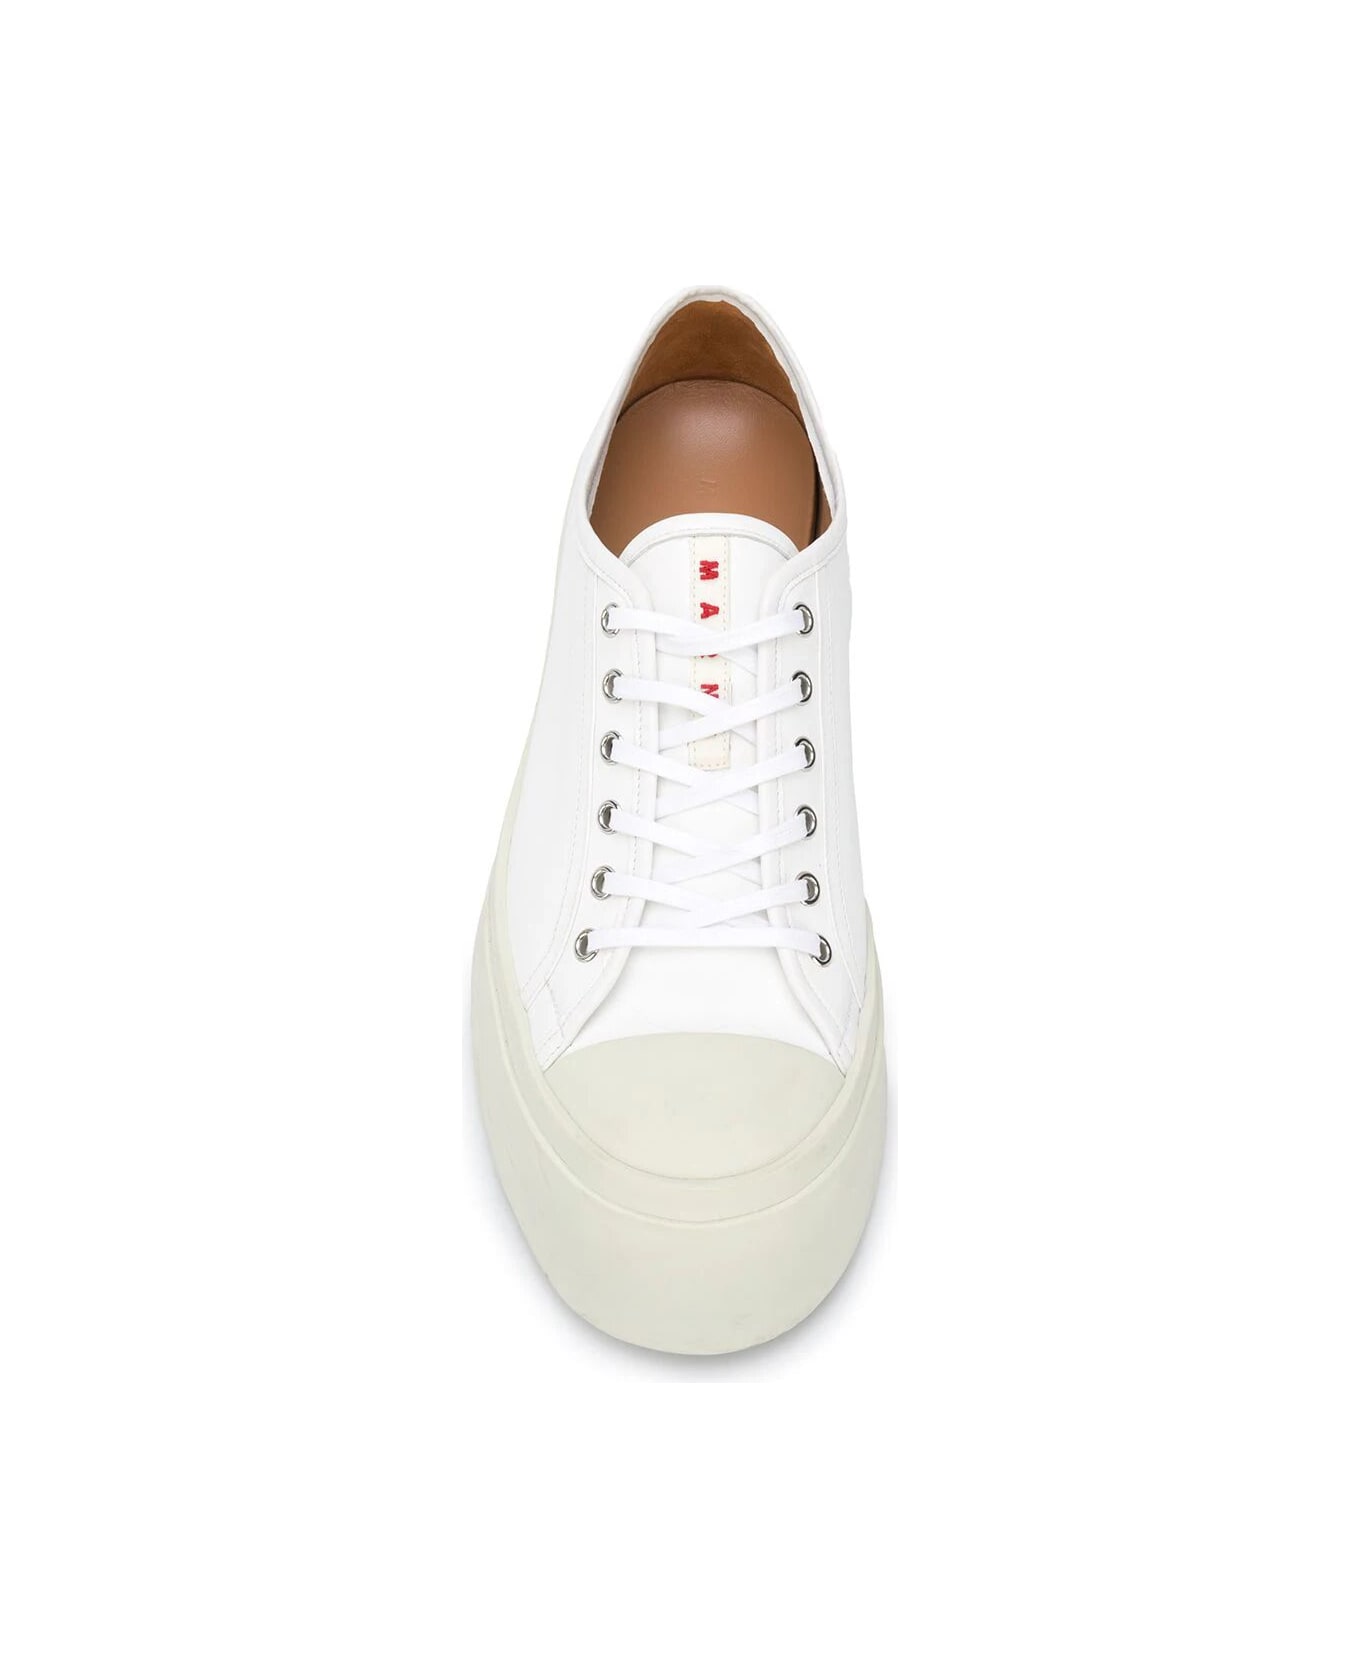 Marni Lace Up Sneakers - Lily White